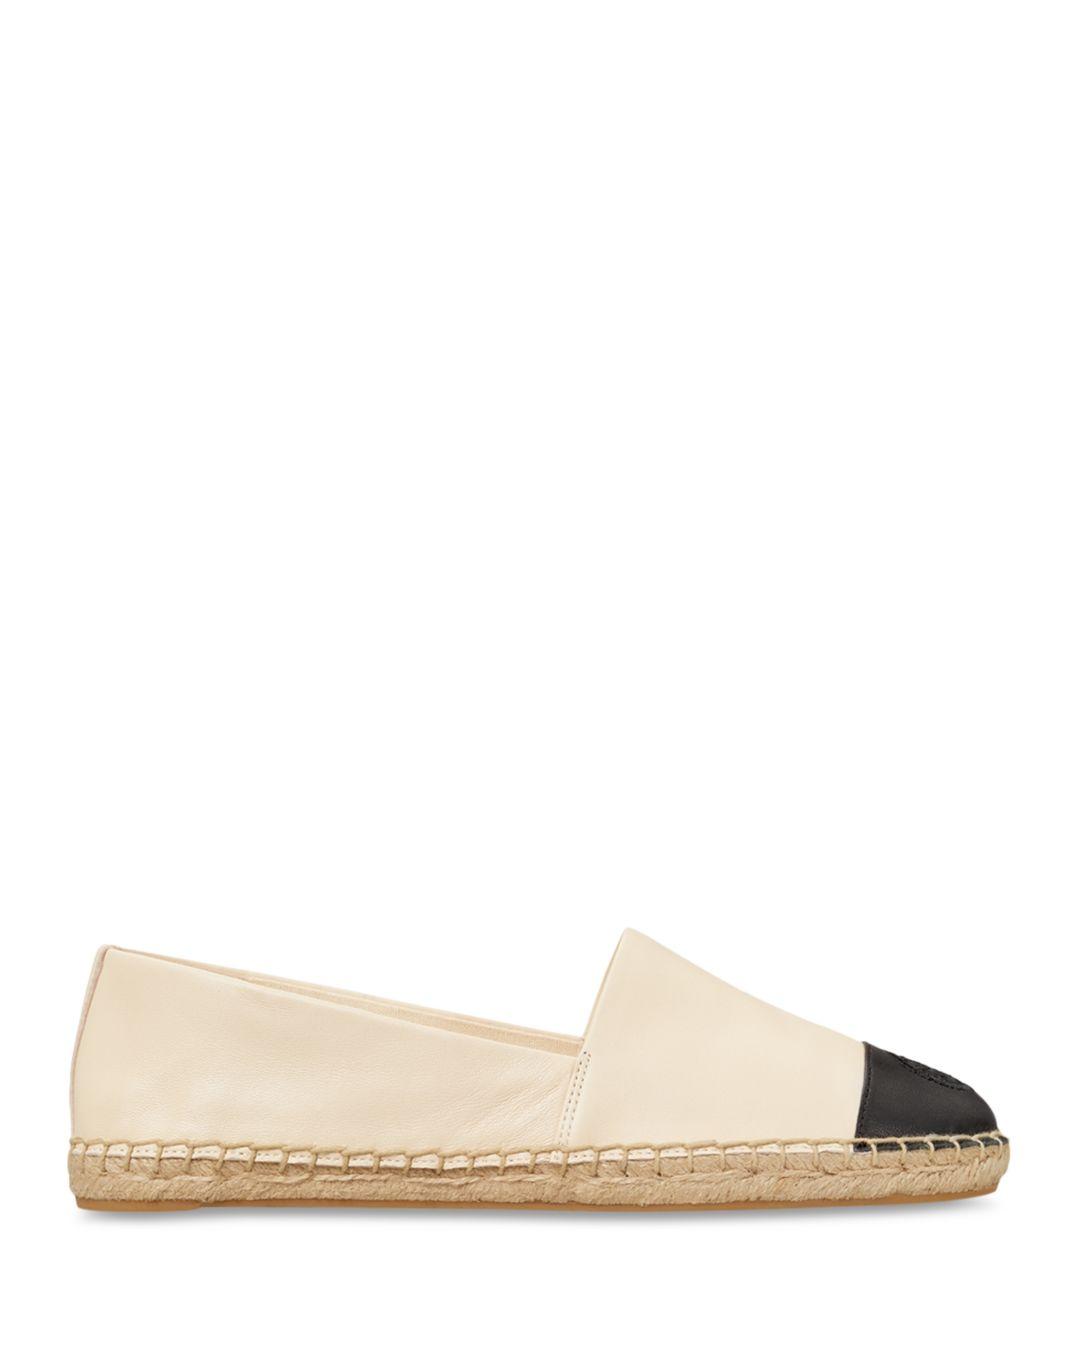 Tory Burch Colorblock Espadrille in Natural | Lyst